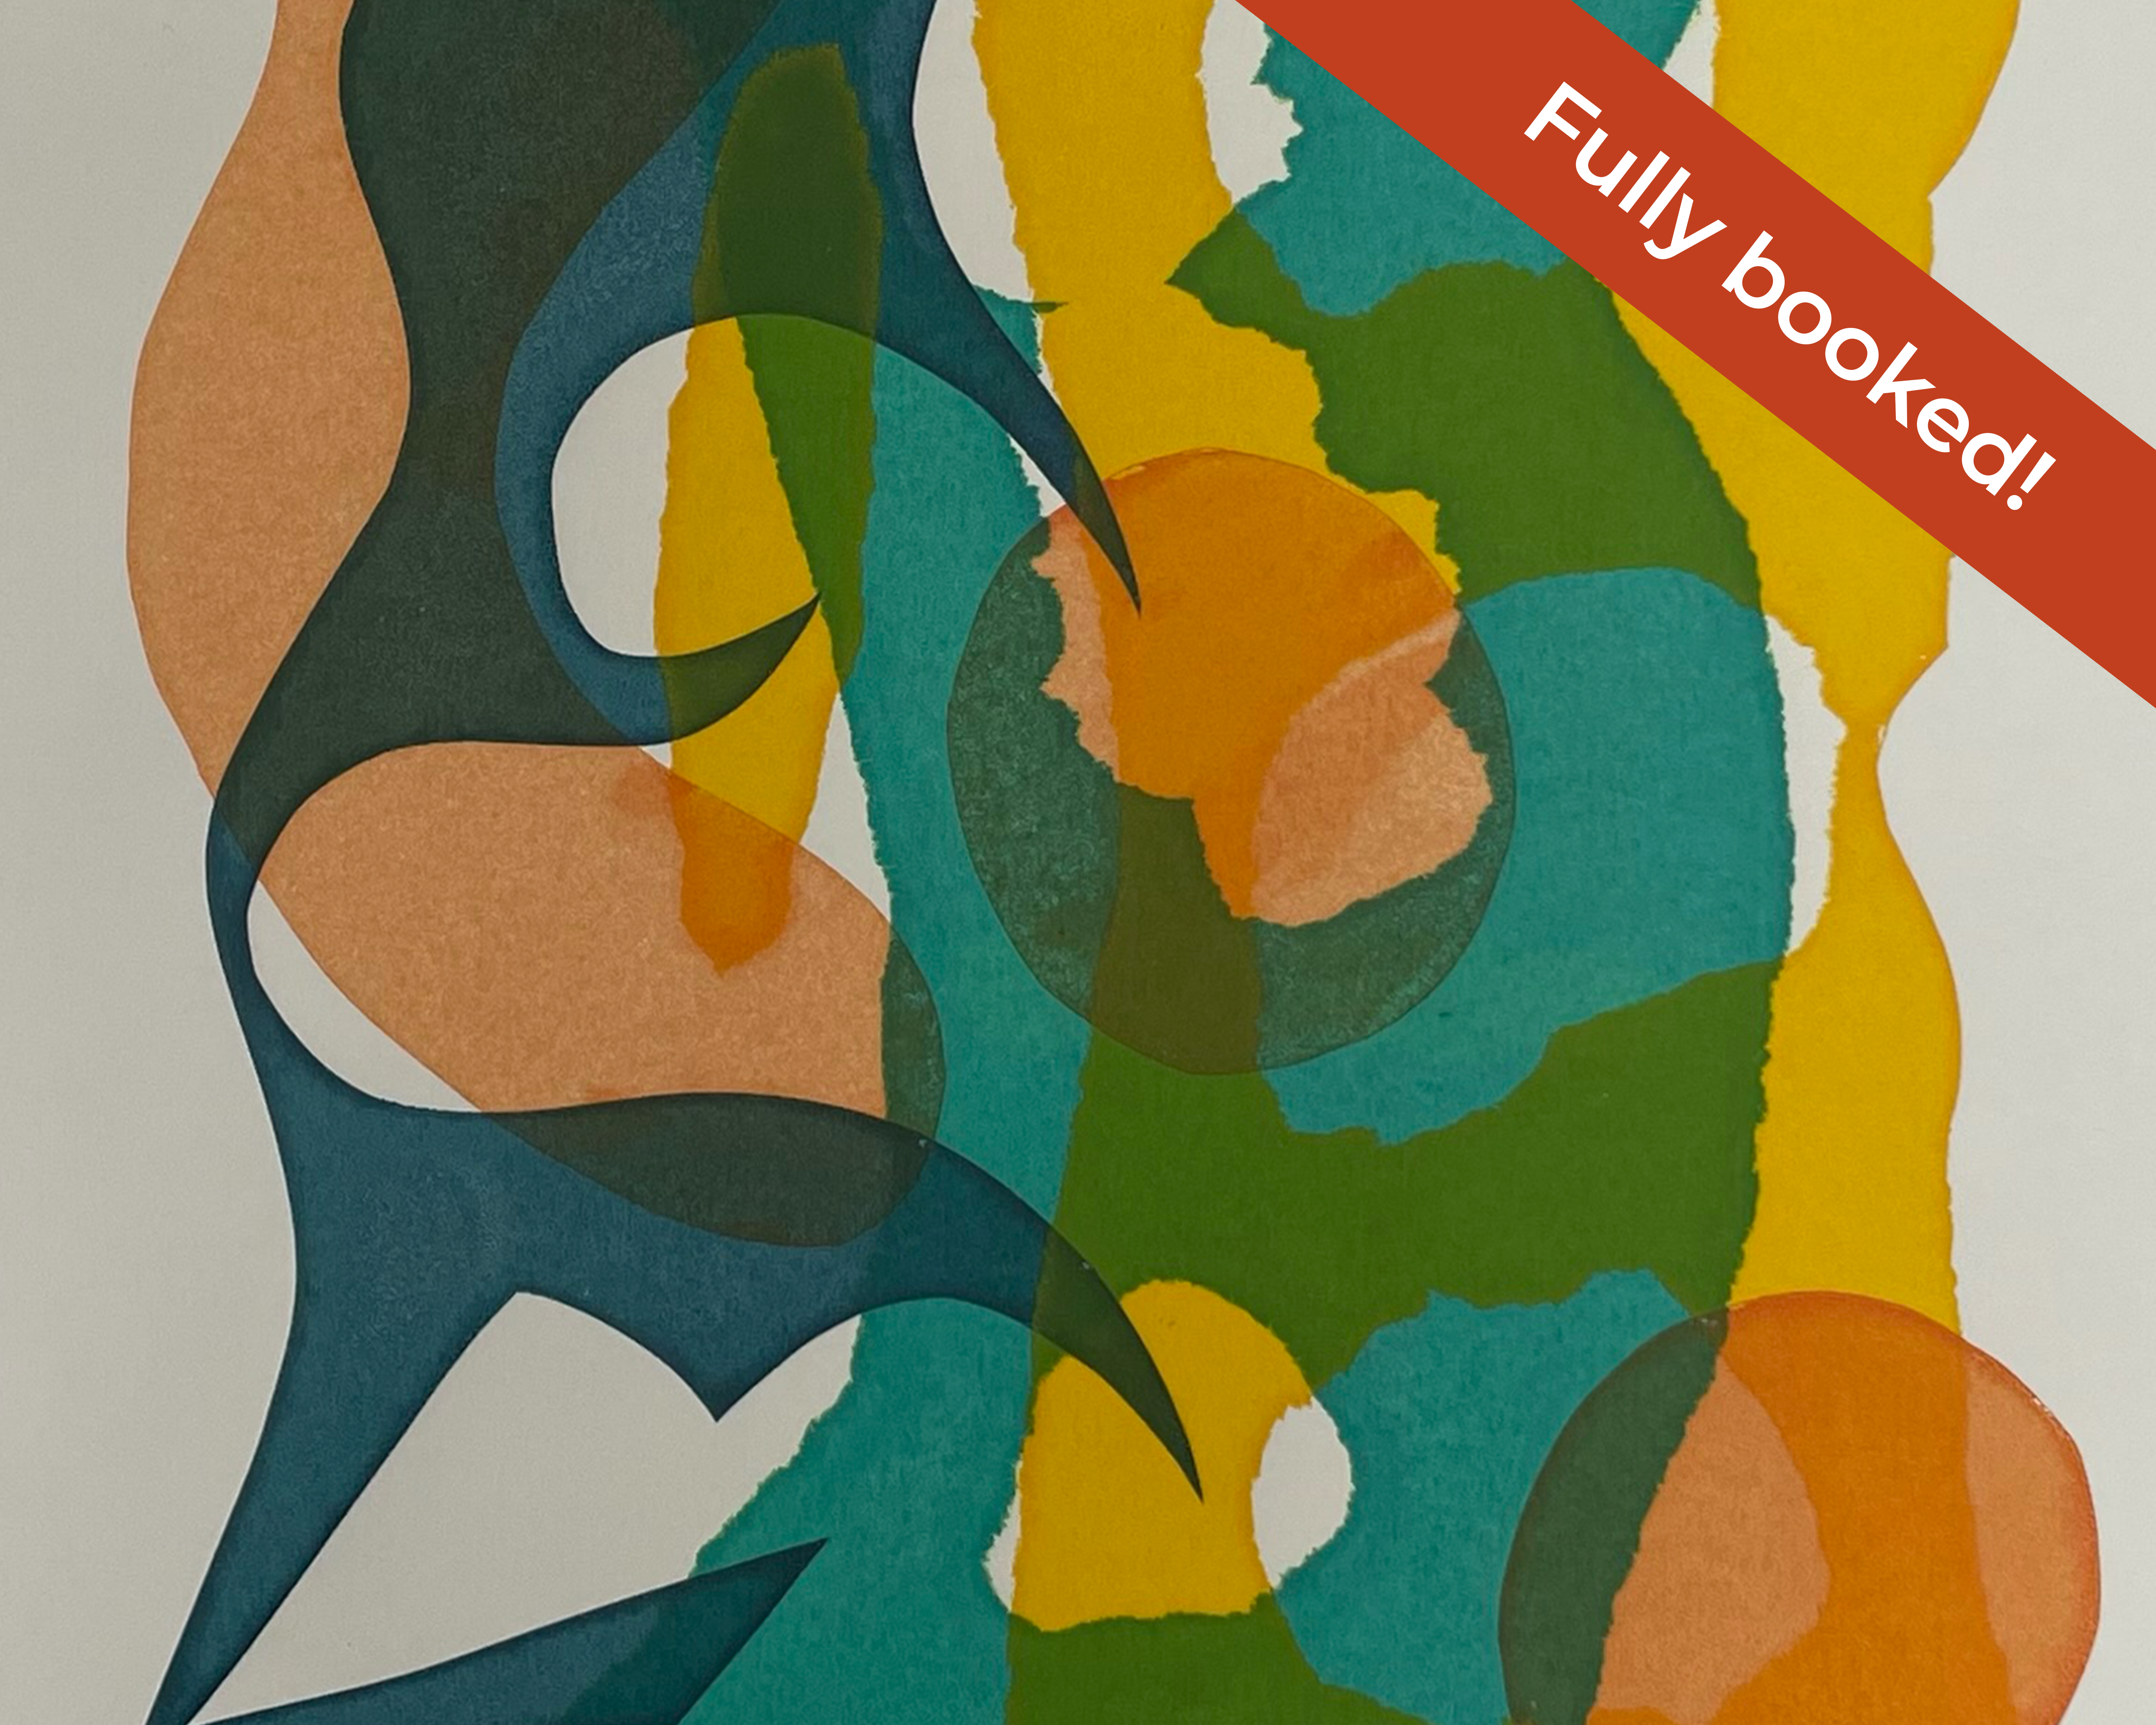 An image of a silk screen print using paper stencils. The main colours used are blue, teal, yellow and orange. These is a red banner overlayed in the top right corner which reads: Fully booked.